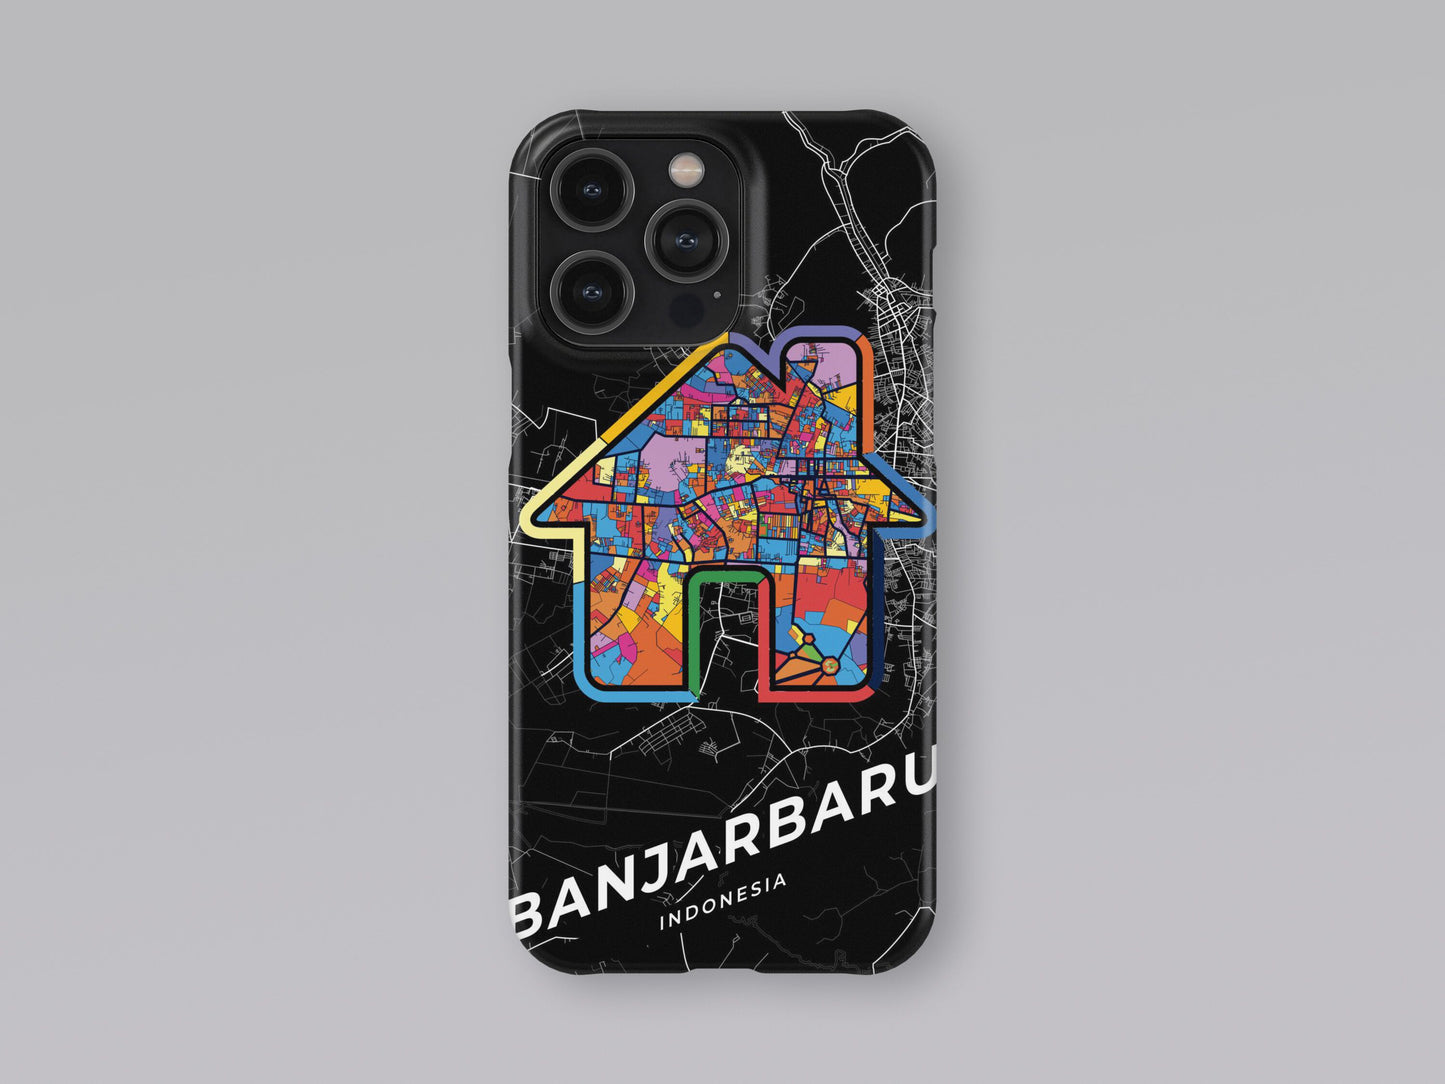 Banjarbaru Indonesia slim phone case with colorful icon. Birthday, wedding or housewarming gift. Couple match cases. 3